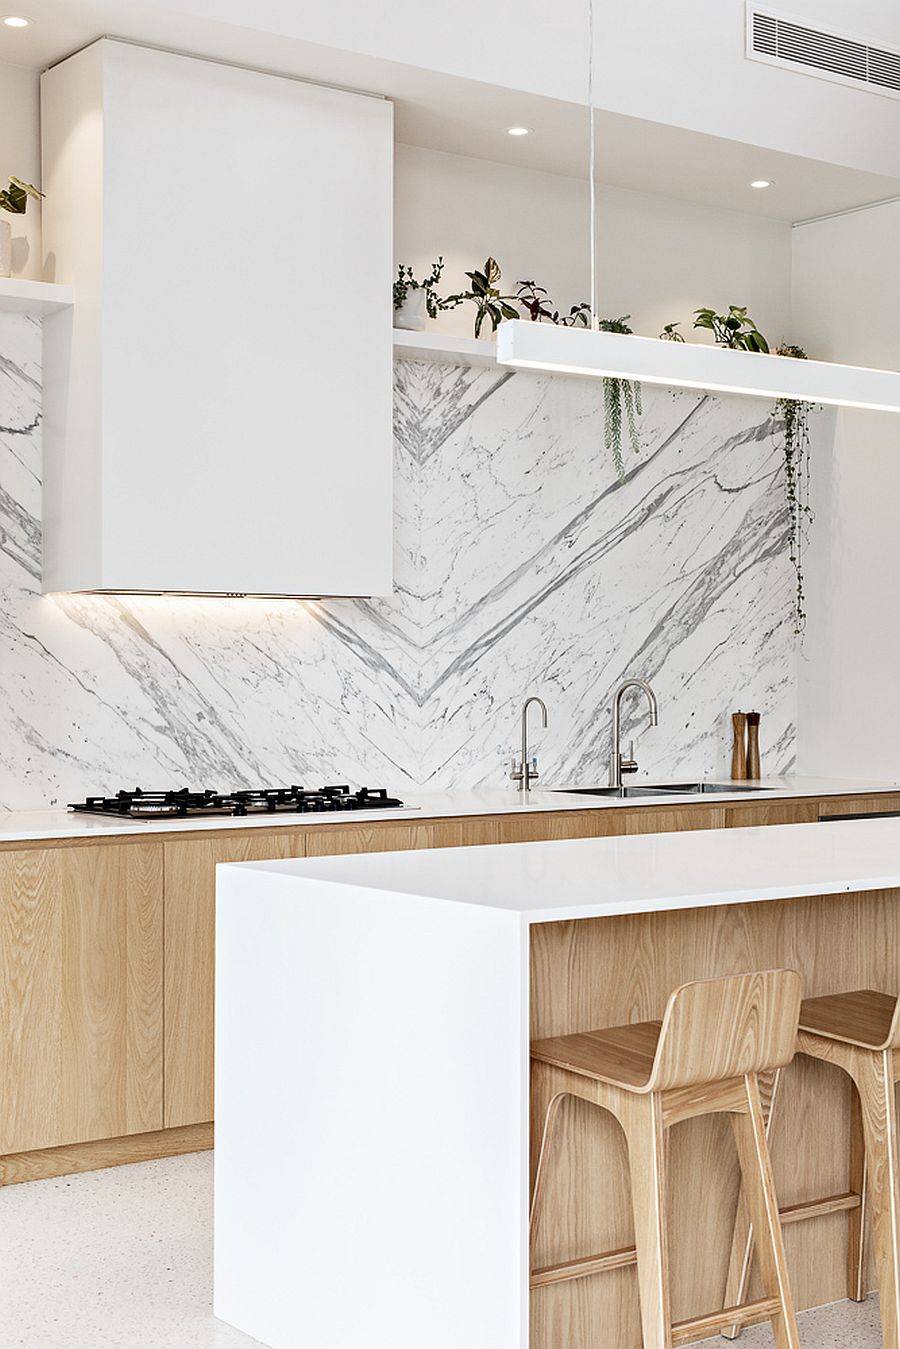 Custom minimal hood and range for the sleek contemporary kitchen in white and wood